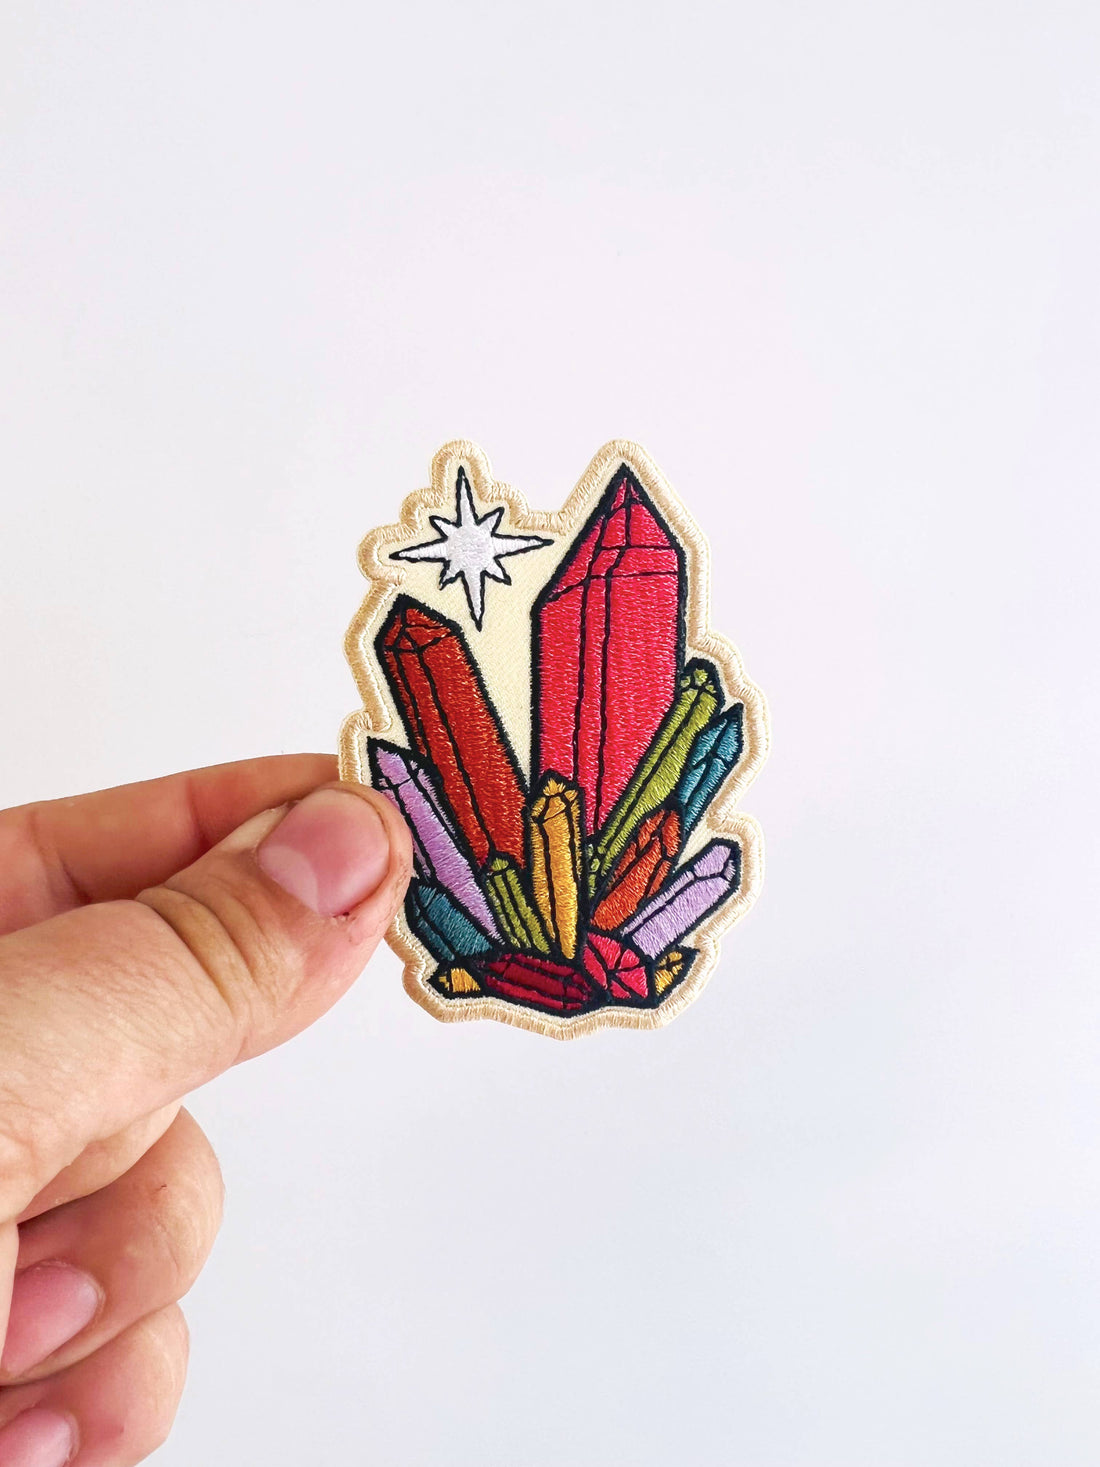 Model holding Rainbow Crystals Embroidered Iron-On Patch